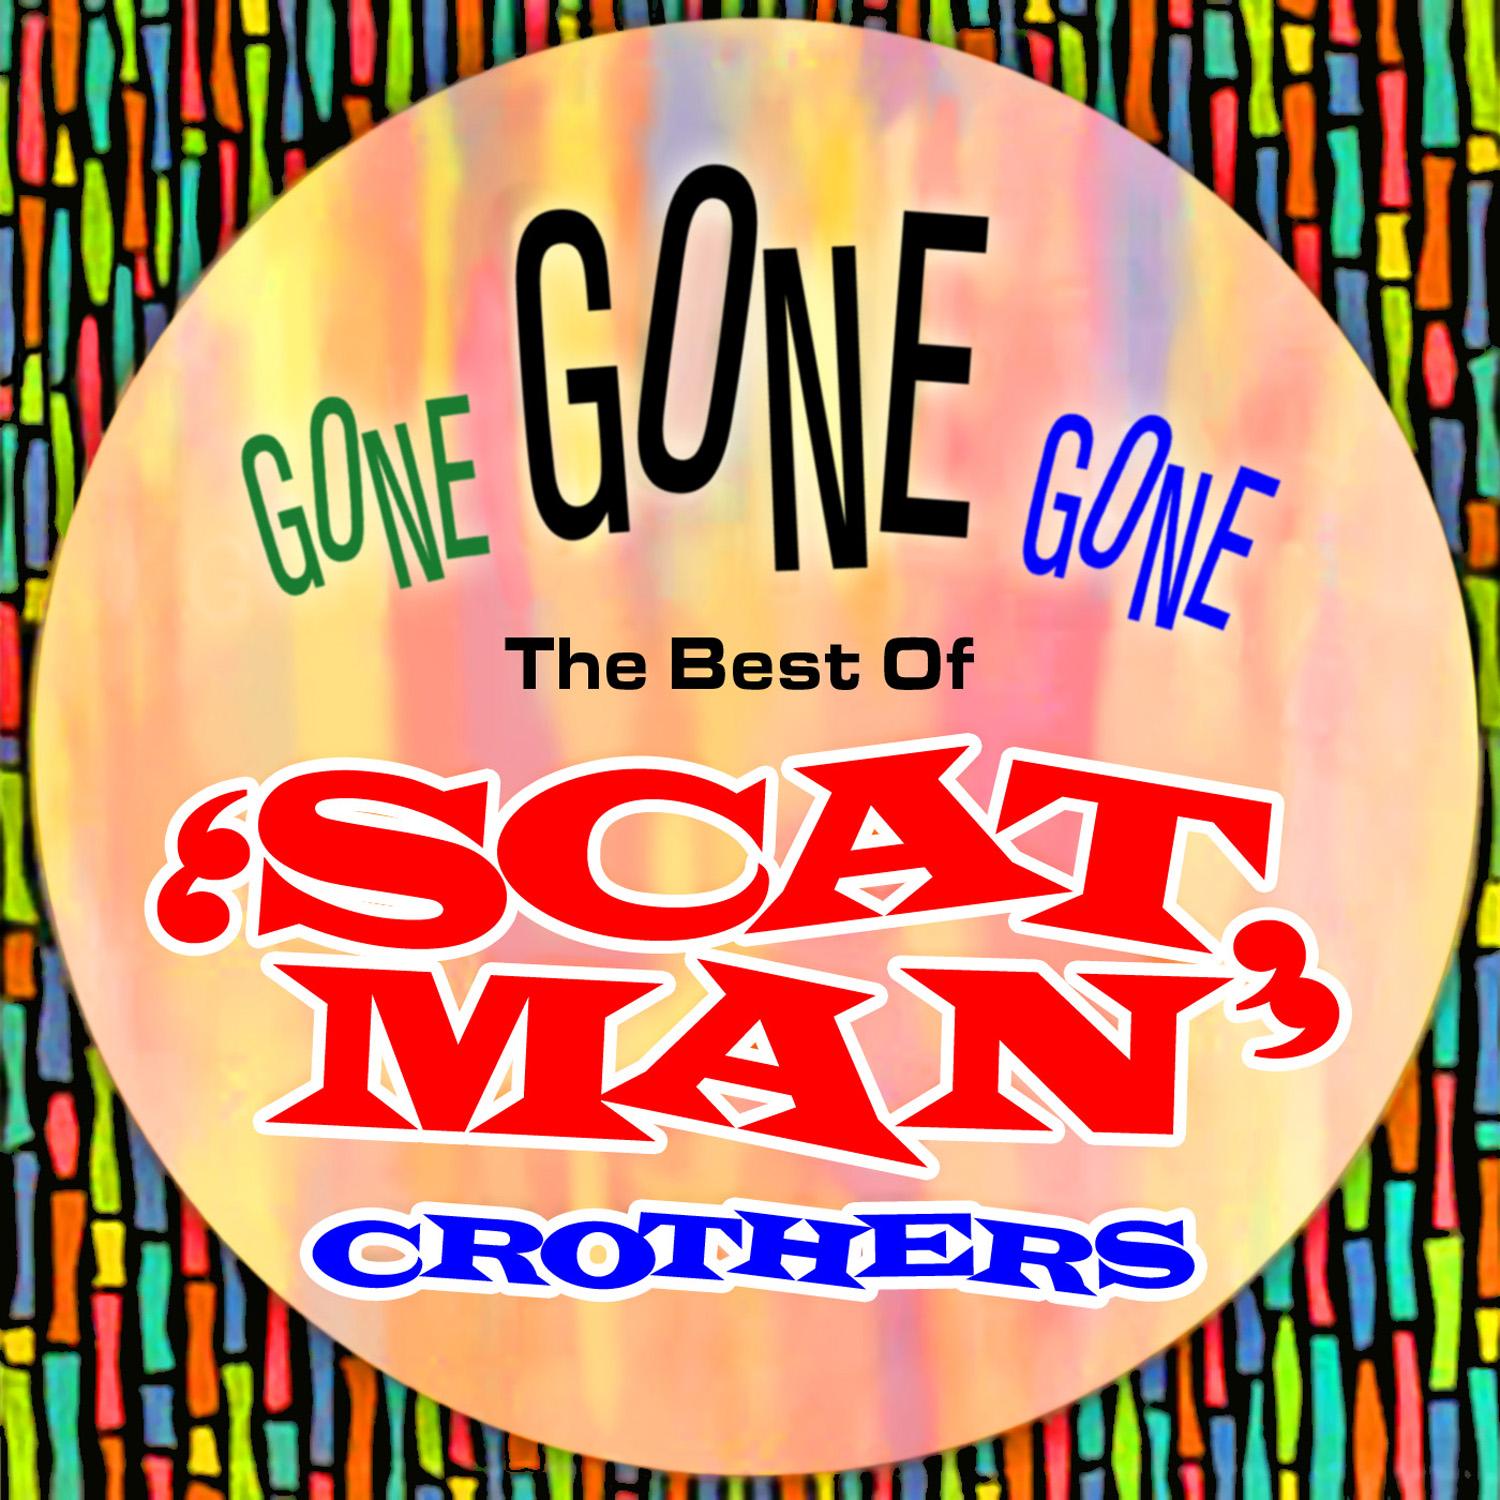 Gone Gone Gone - The Best Of